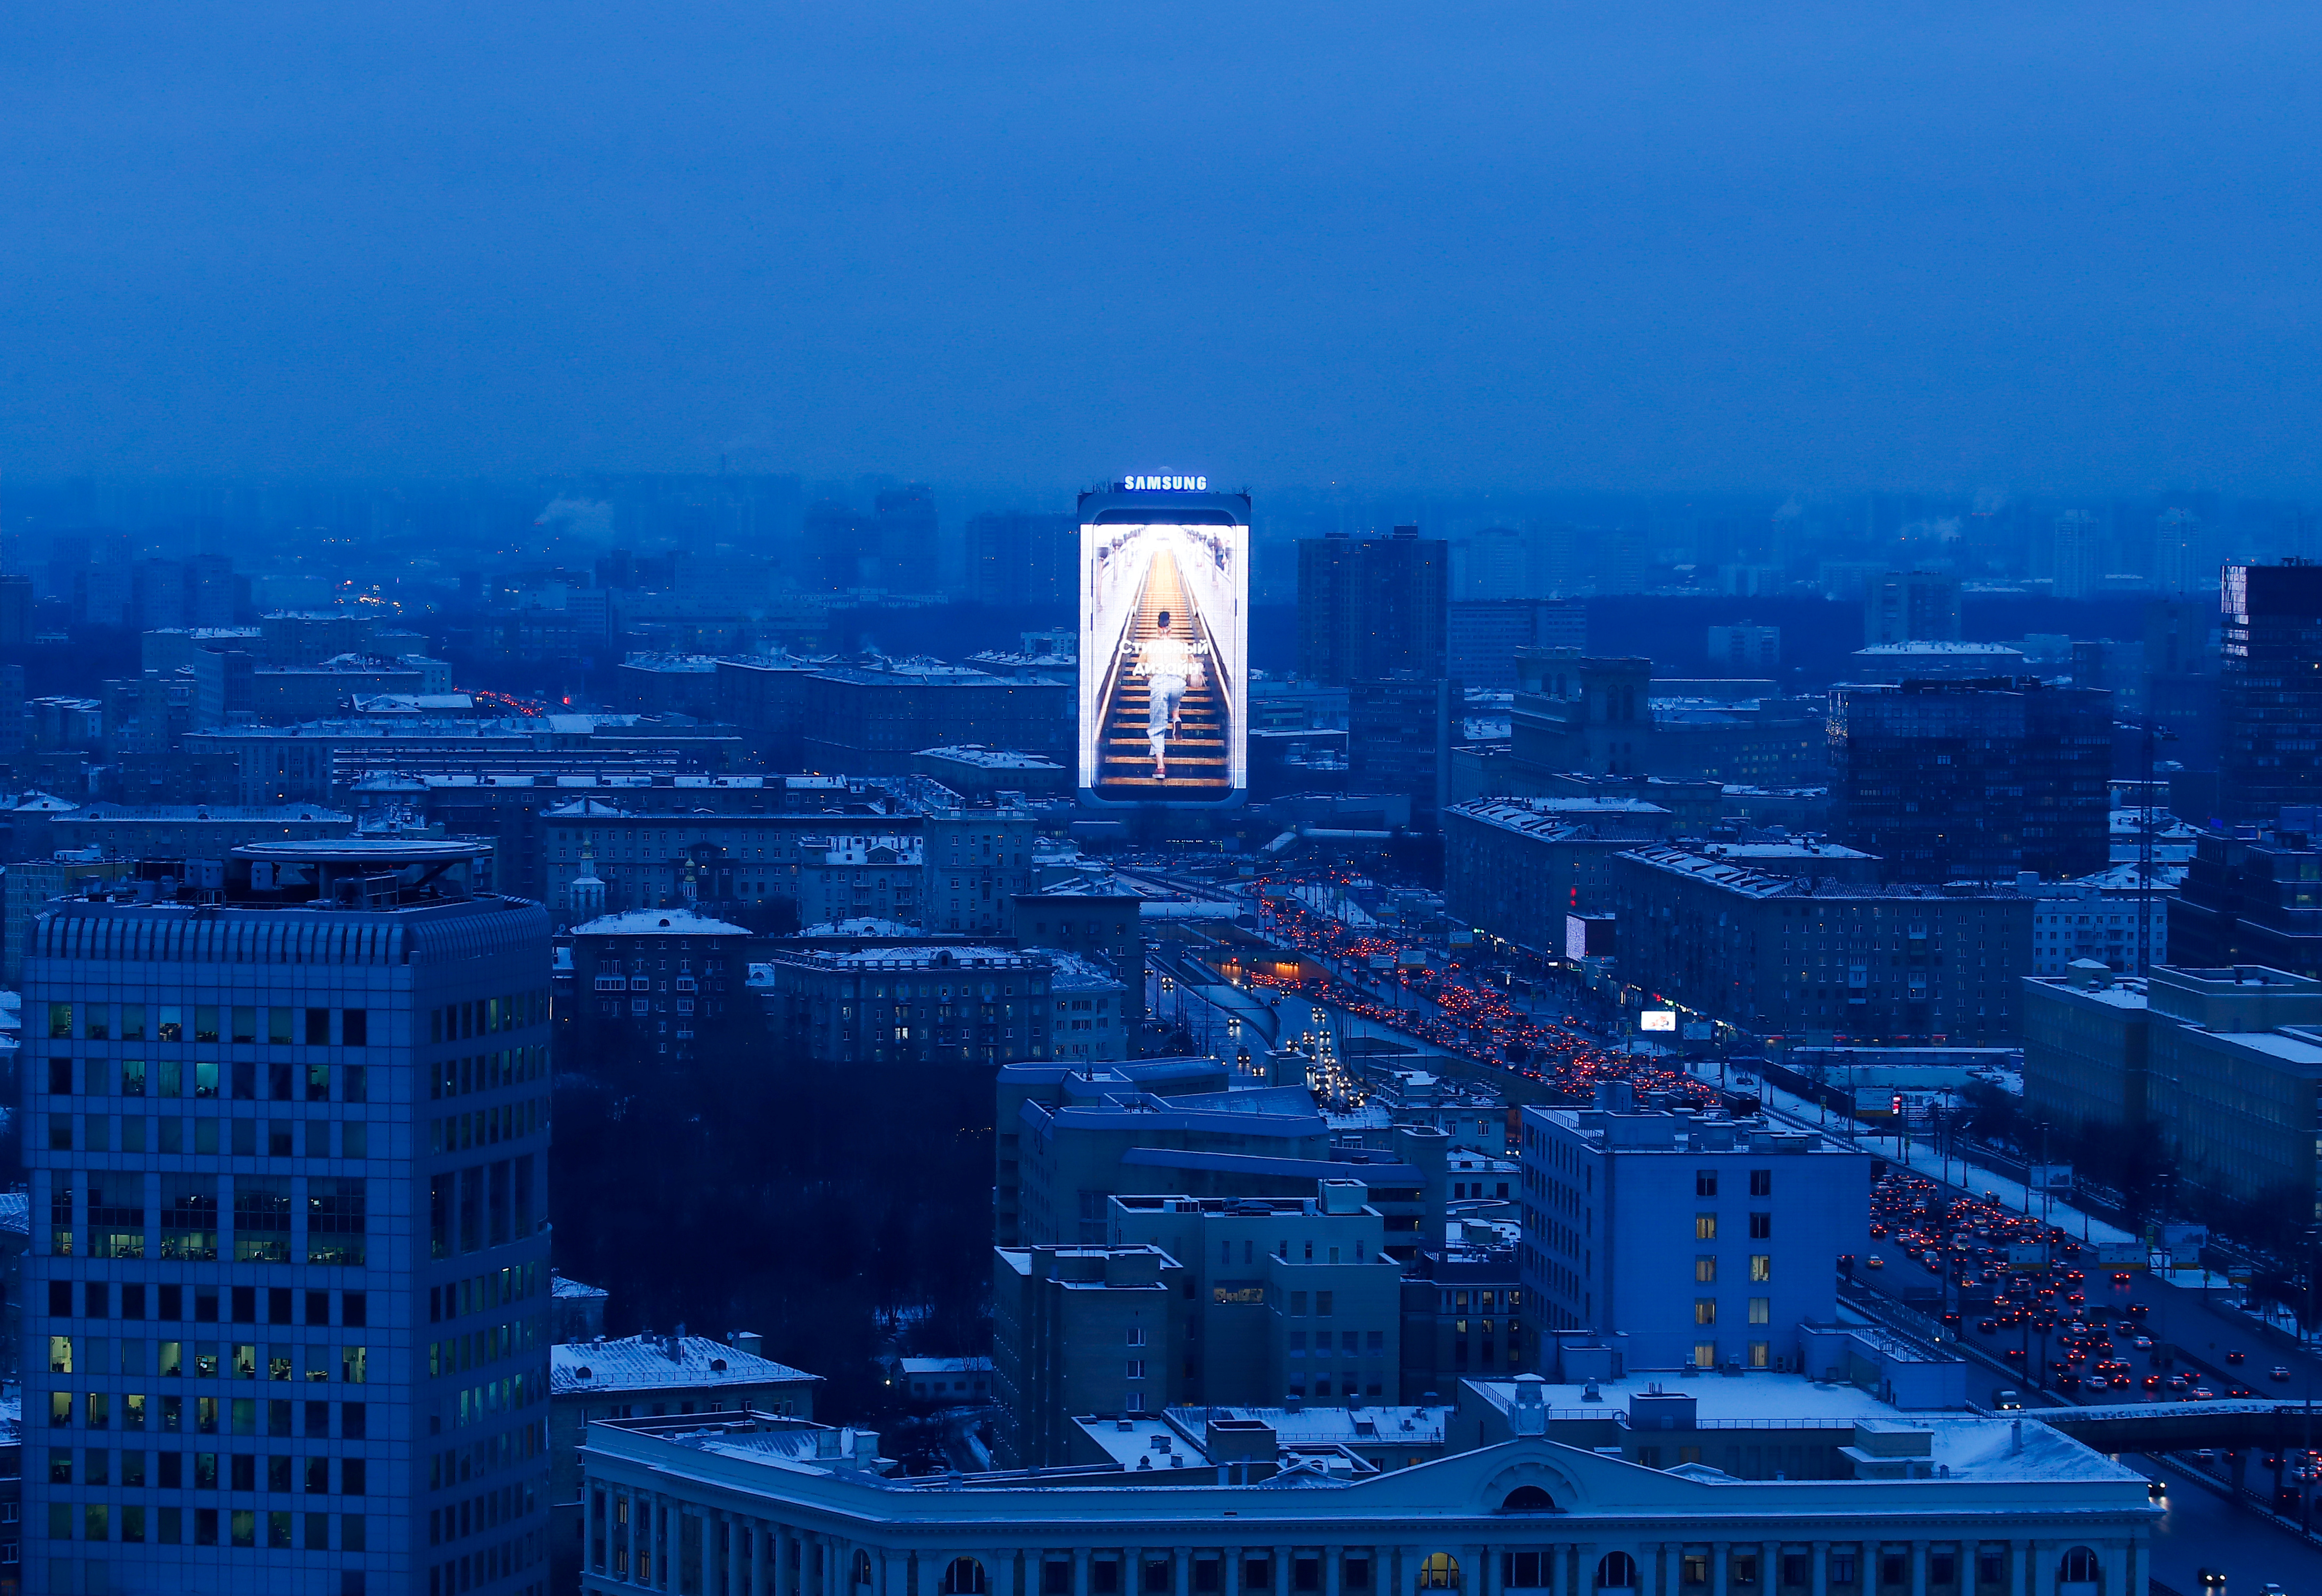 Advertisement board displays a Samsung advertisement in Moscow